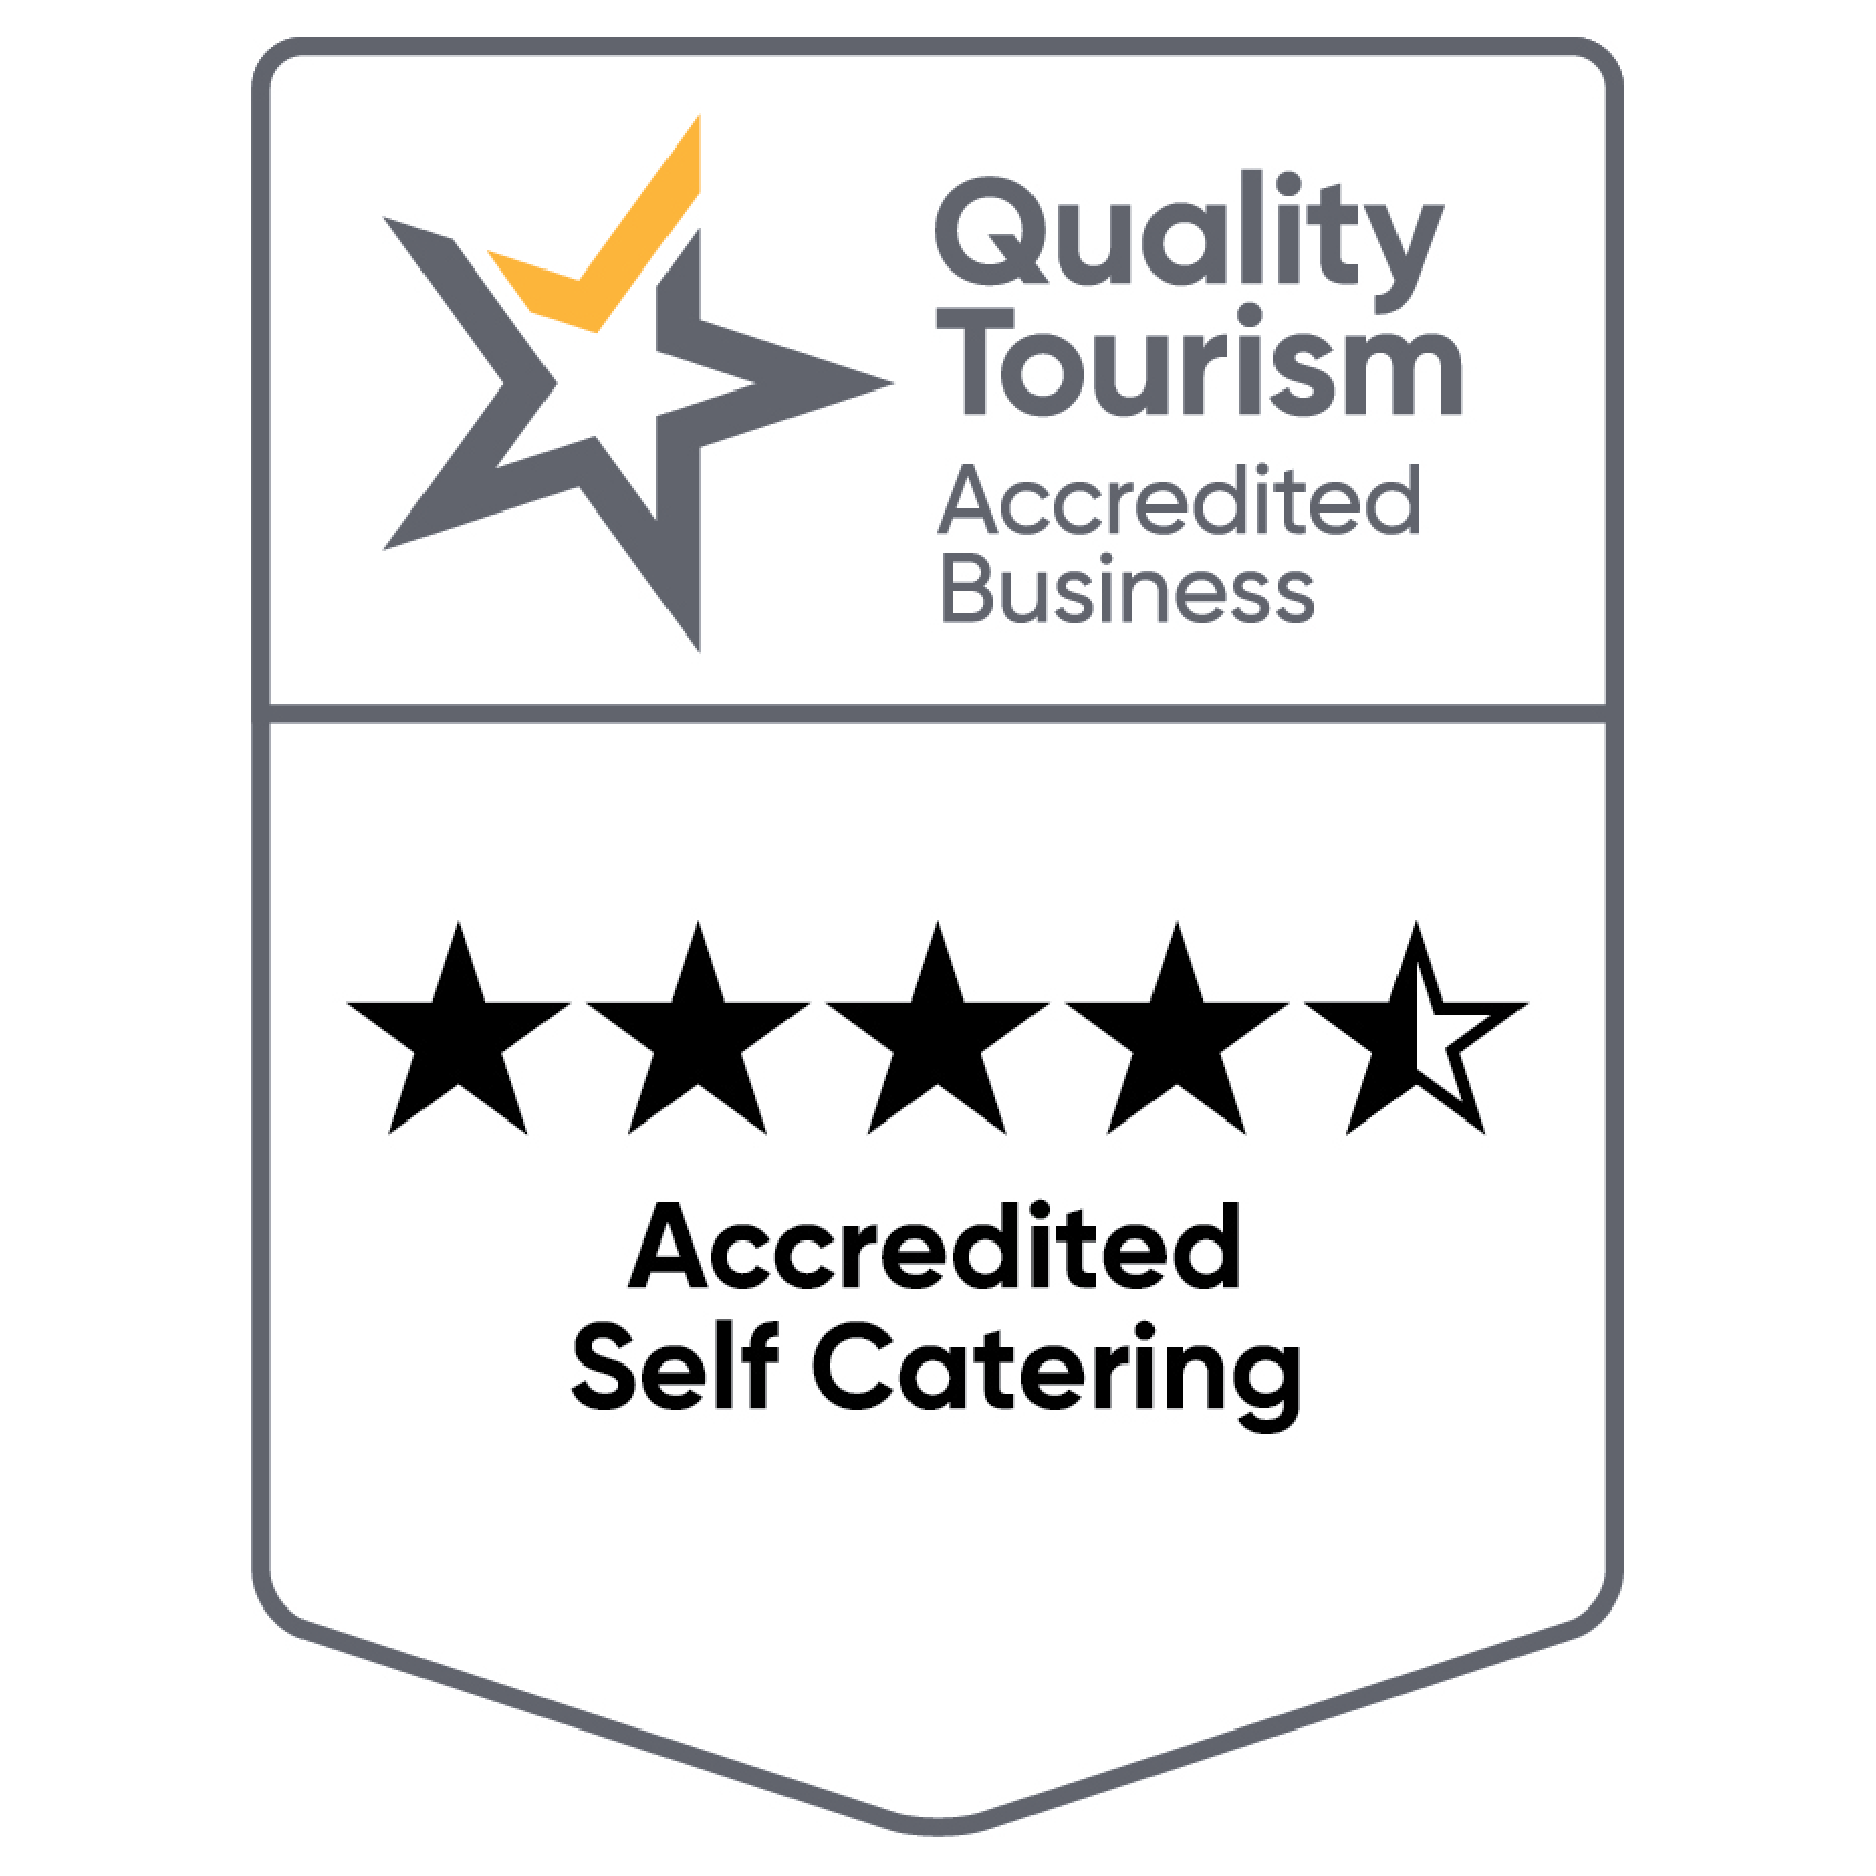 Quality Tourism Award - Accredited Self Catering.png